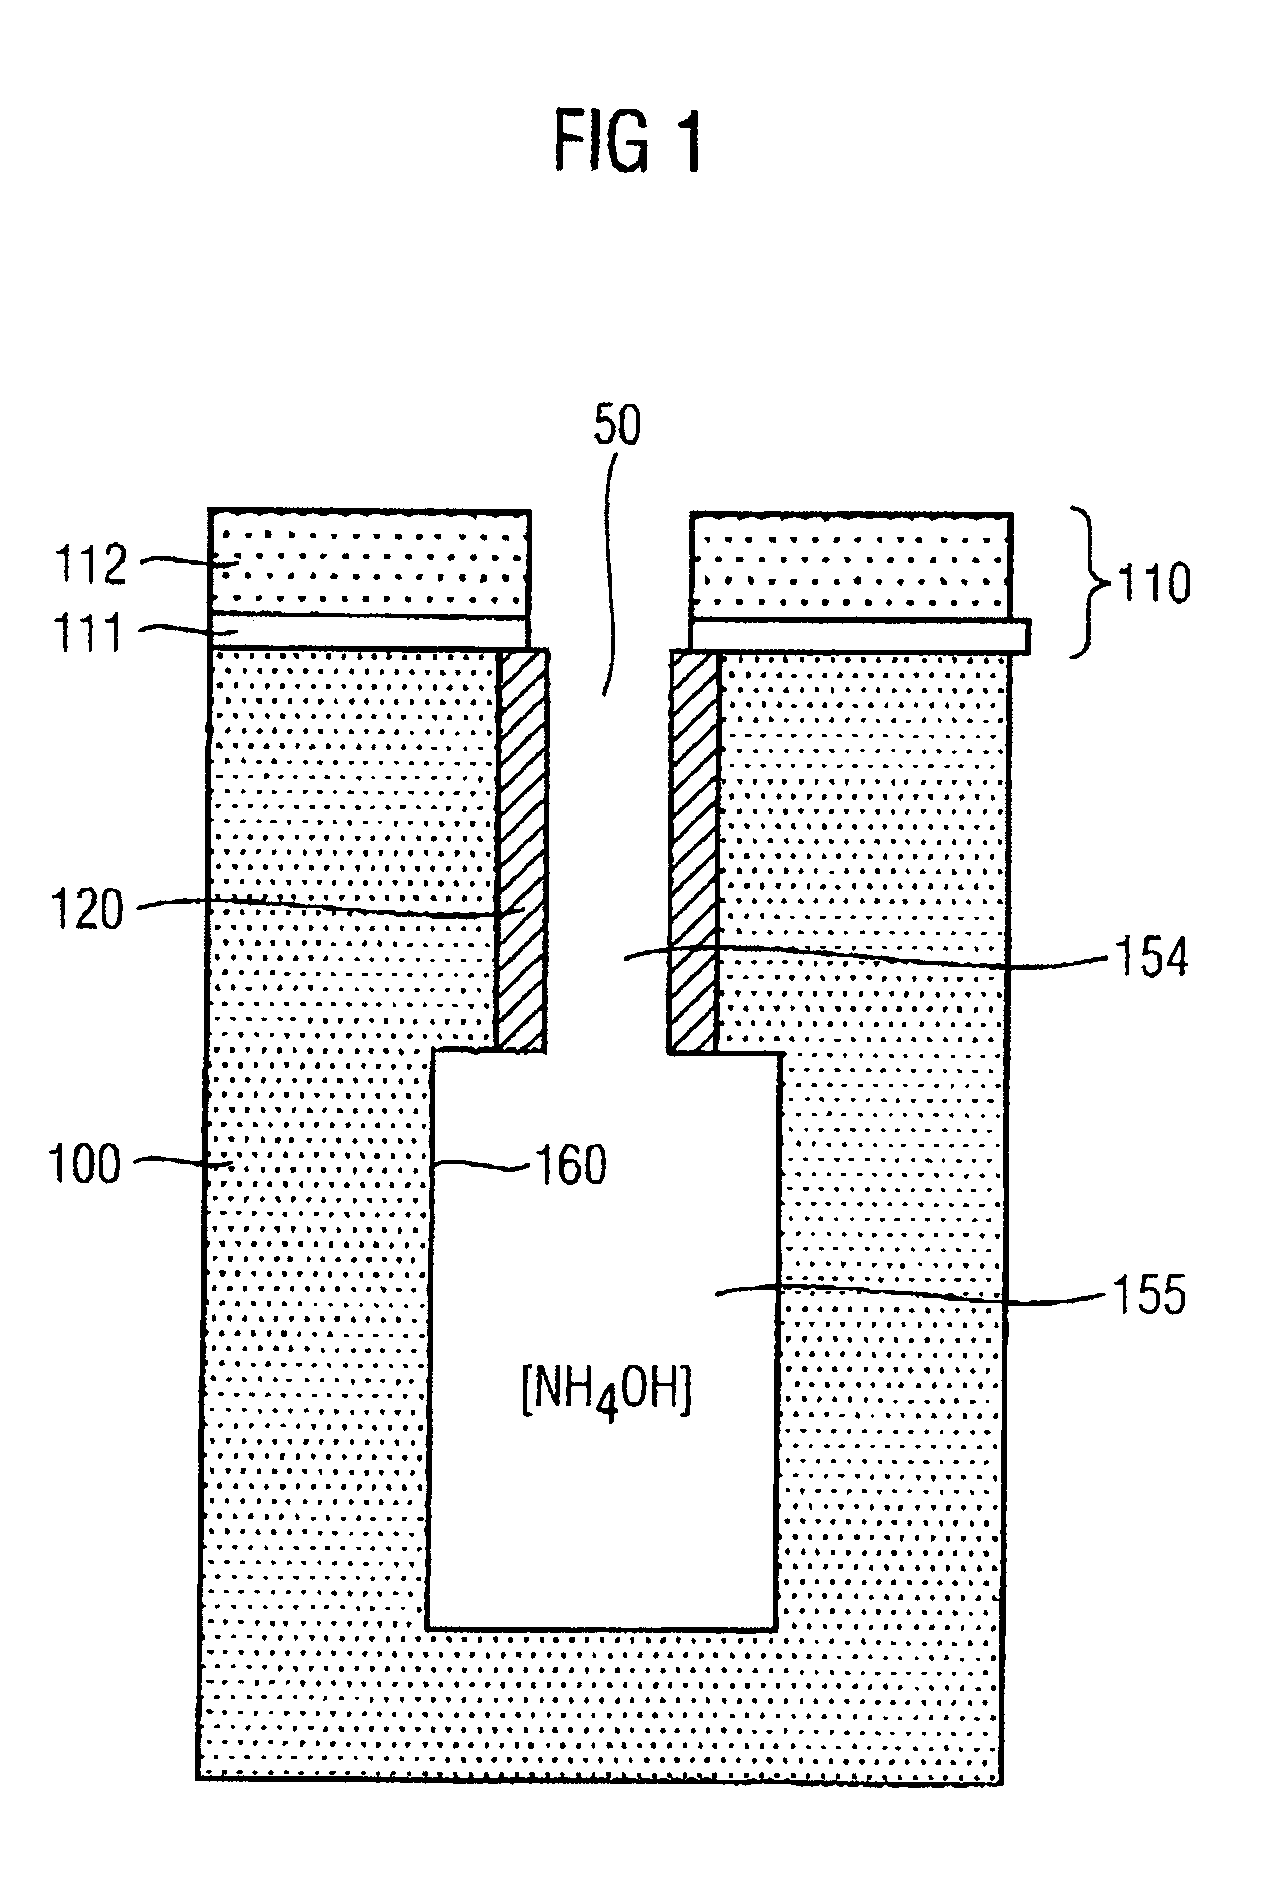 Method for expanding a trench in a semiconductor structure